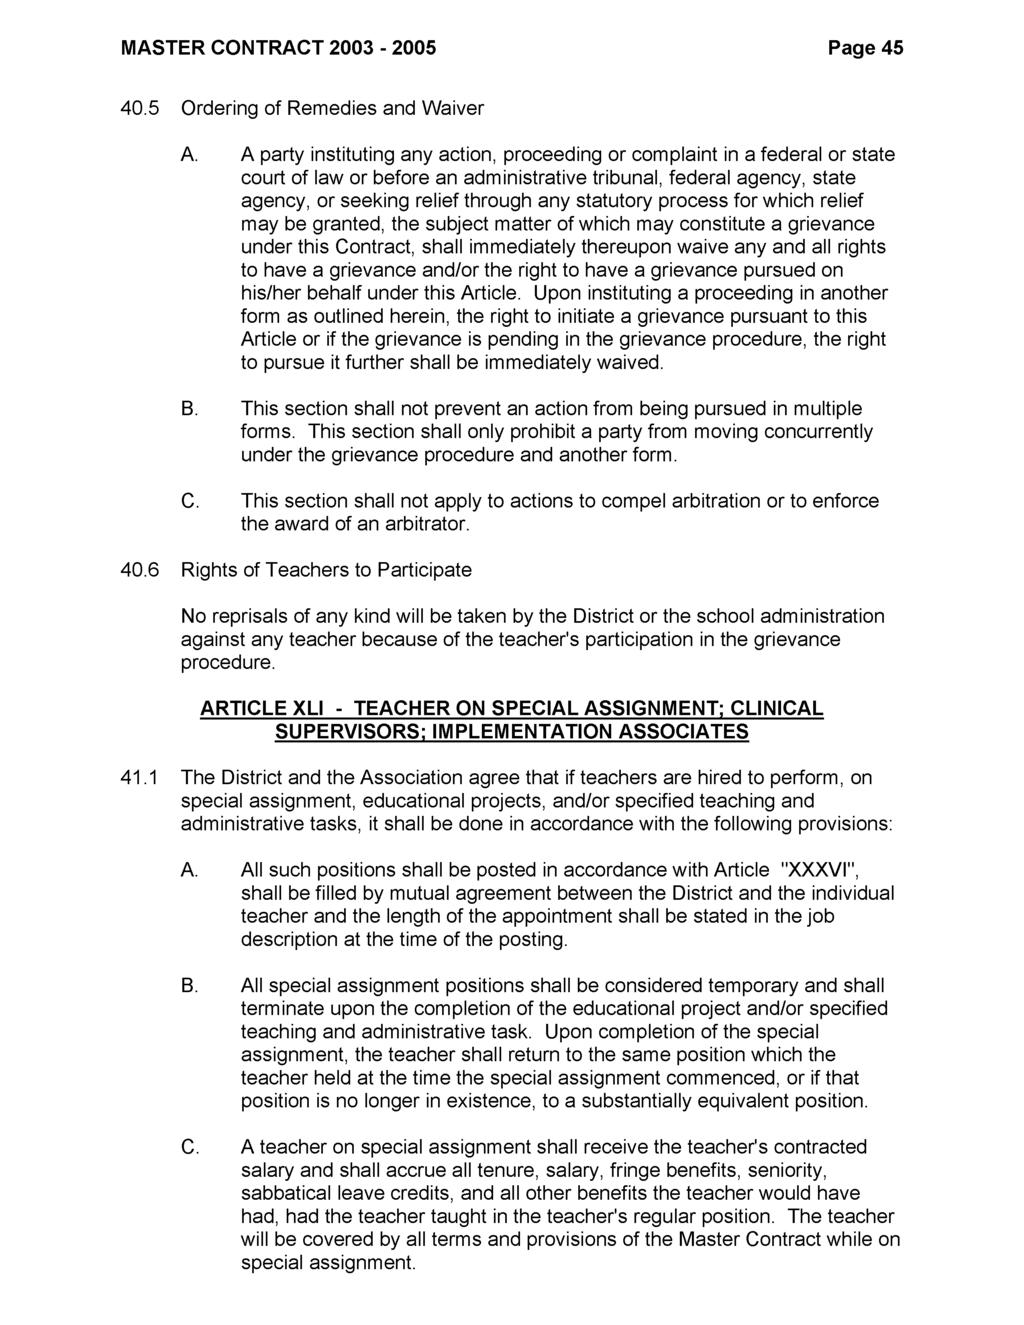 MASTER CONTRACT 2003-2005 Page 45 40.5 Ordering of Remedies and Waiver A.